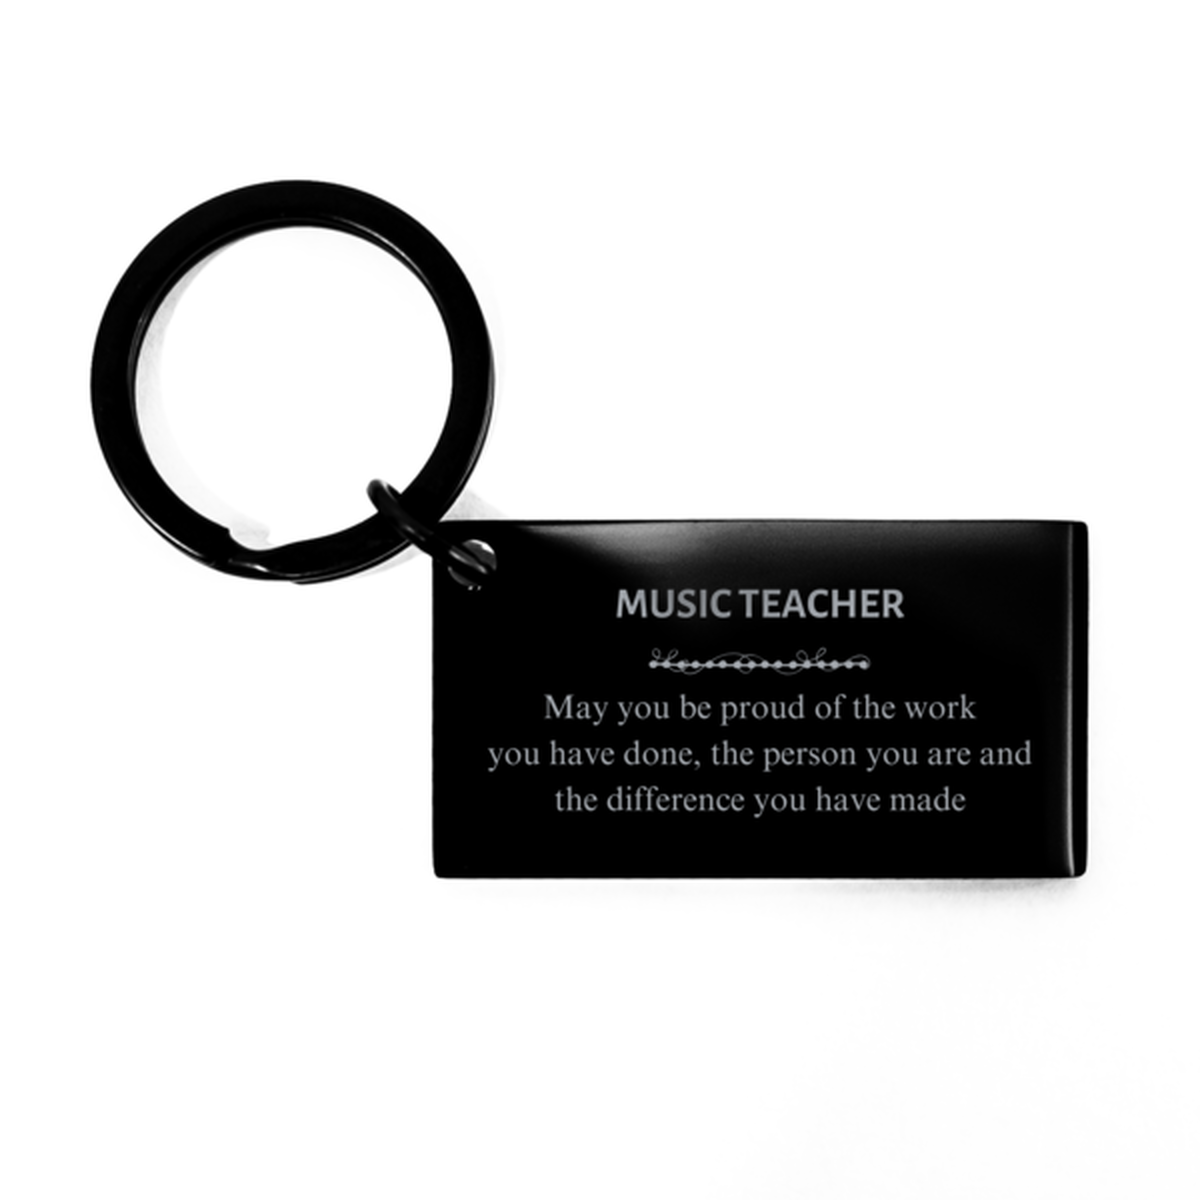 Paraprofessional May you be proud of the work you have done, Retirement Music Teacher Keychain for Colleague Appreciation Gifts Amazing for Music Teacher